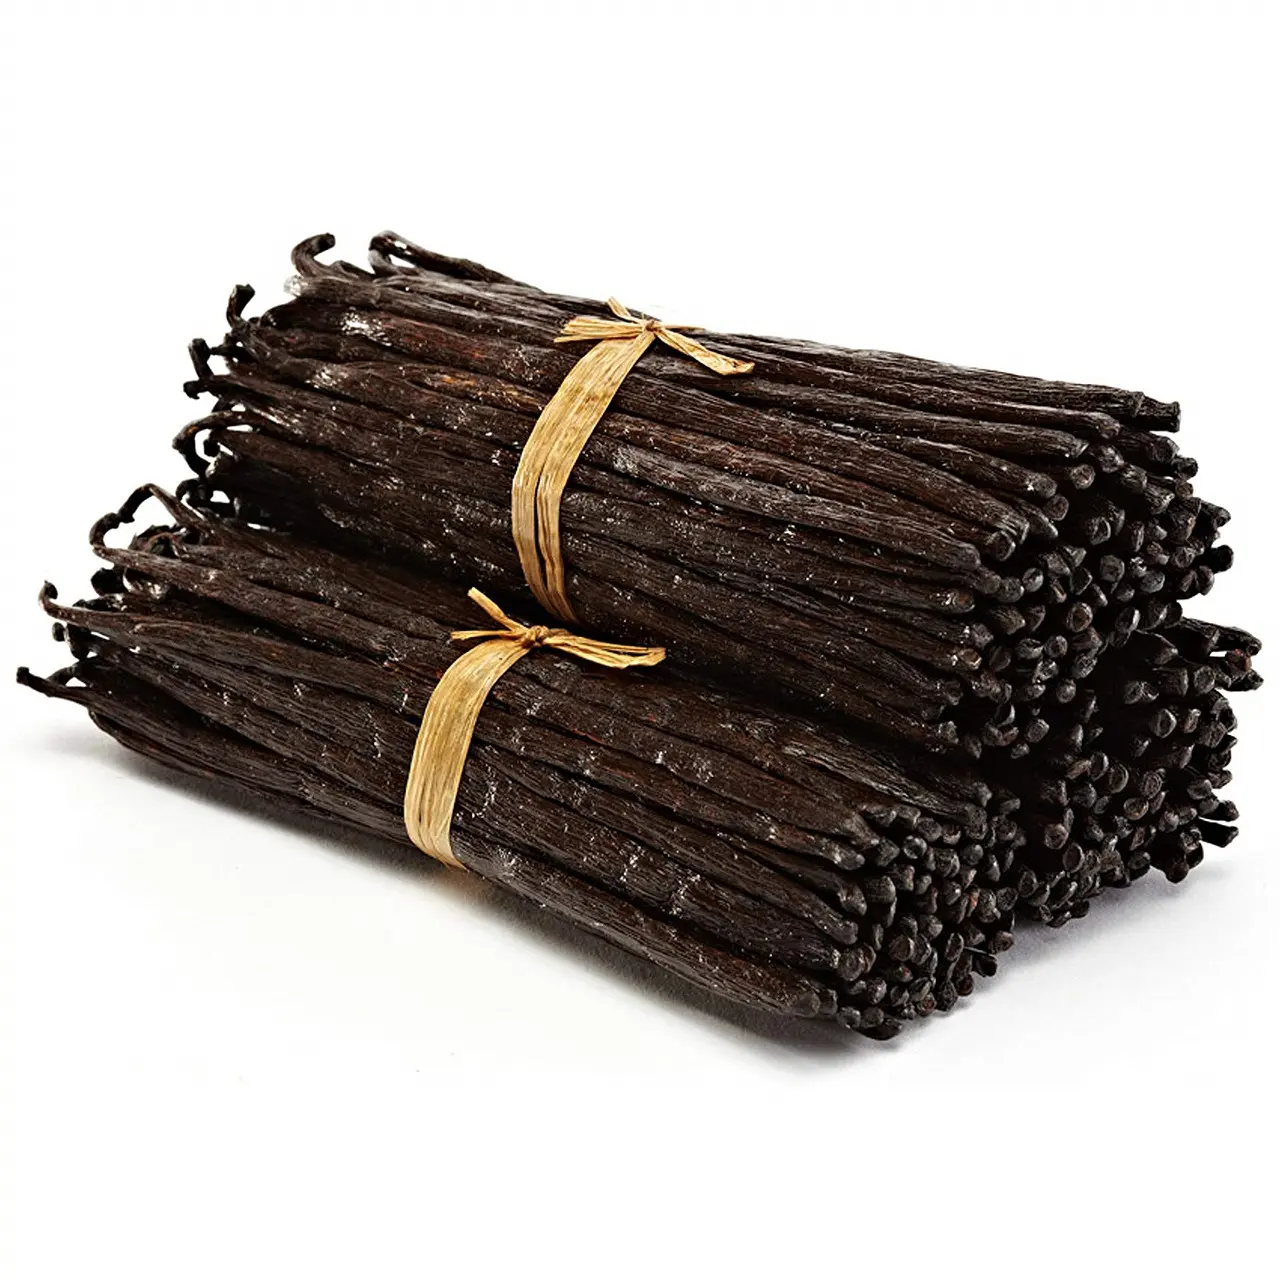 Madagascar Vanilla Beans Best Quality for Cheap Wholesale Price